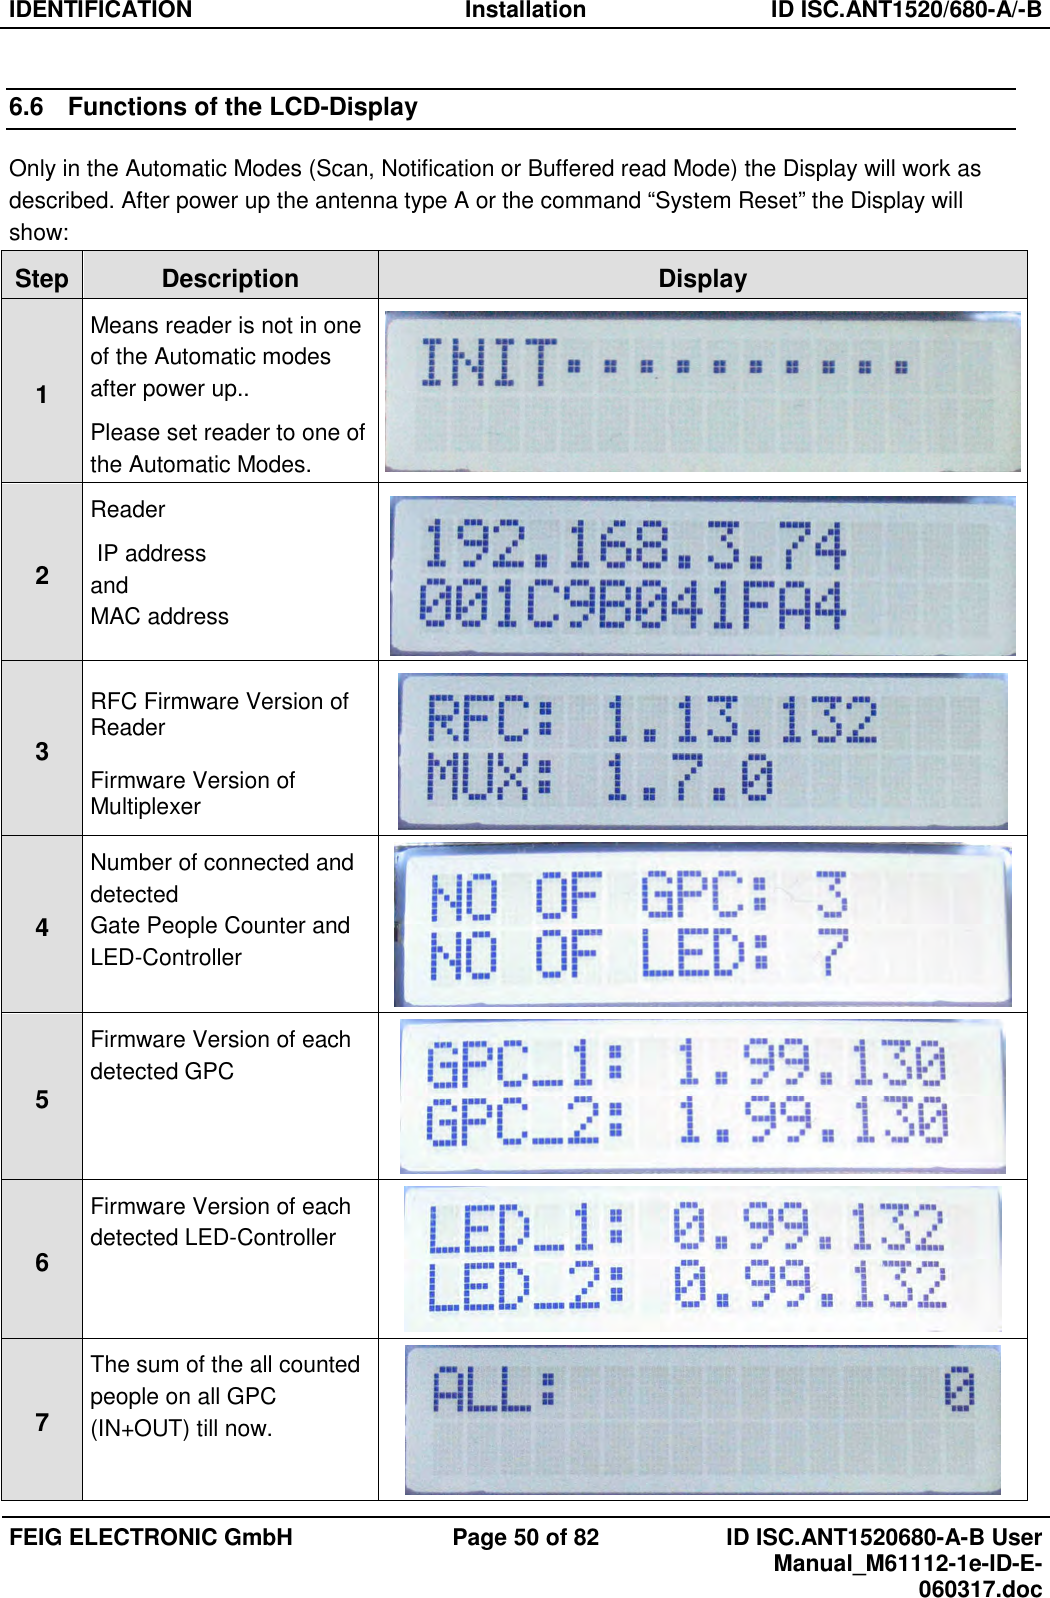 IDENTIFICATION  Installation  ID ISC.ANT1520/680-A/-B  FEIG ELECTRONIC GmbH  Page 50 of 82  ID ISC.ANT1520680-A-B User Manual_M61112-1e-ID-E-060317.doc  6.6  Functions of the LCD-Display Only in the Automatic Modes (Scan, Notification or Buffered read Mode) the Display will work as described. After power up the antenna type A or the command “System Reset” the Display will show: Step Description  Display 1 Means reader is not in one of the Automatic modes after power up.. Please set reader to one of the Automatic Modes.  2 Reader  IP address and MAC address   3  RFC Firmware Version of Reader  Firmware Version of Multiplexer   4 Number of connected and detected  Gate People Counter and  LED-Controller  5 Firmware Version of each detected GPC  6 Firmware Version of each detected LED-Controller  7 The sum of the all counted people on all GPC (IN+OUT) till now.  